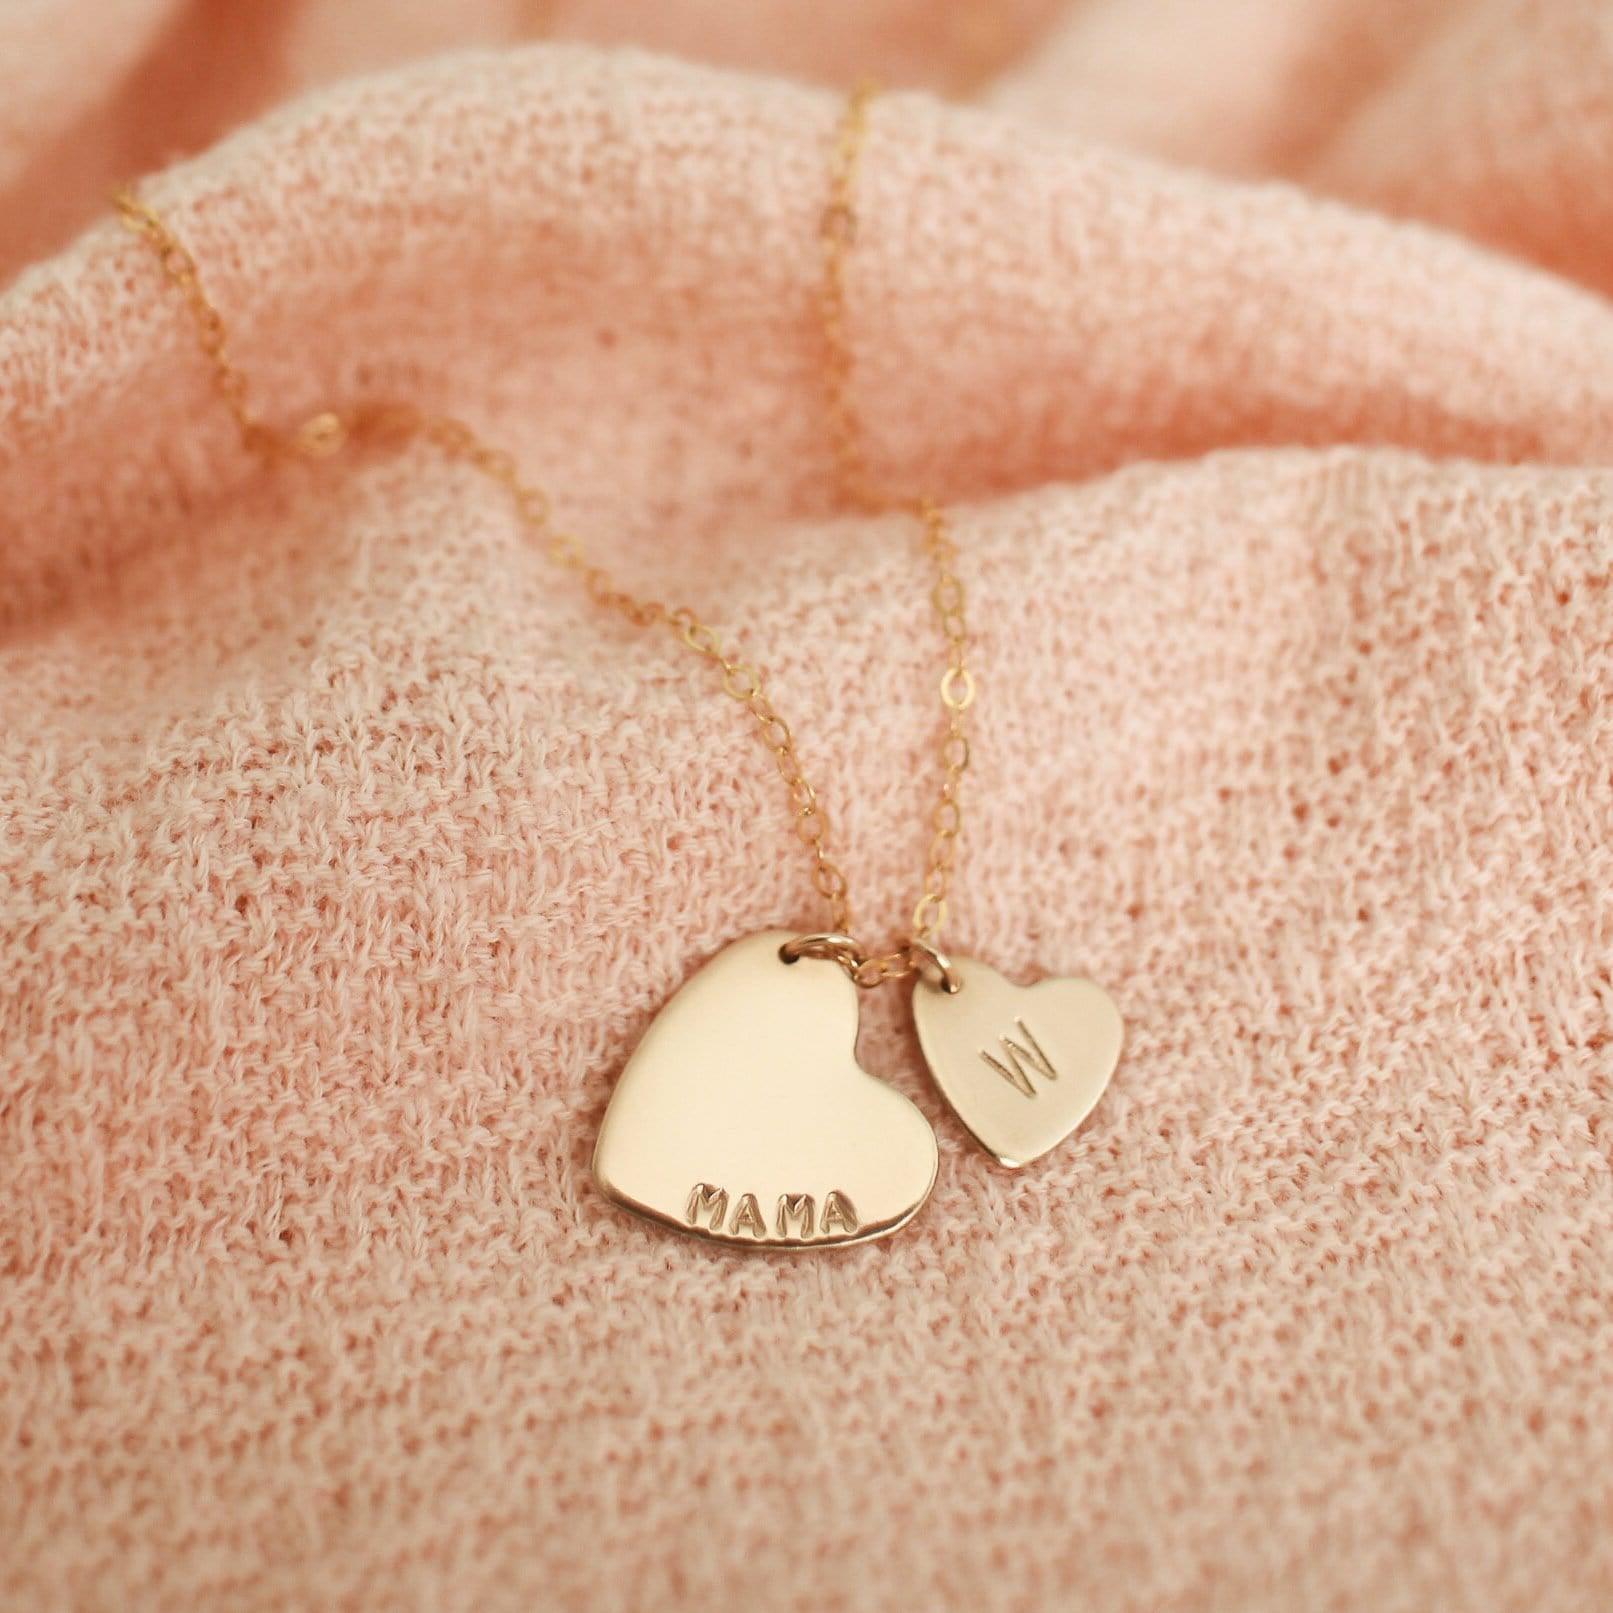 Mama's Heart Necklace - Nolia Jewelry - Meaningful + Sustainably Handcrafted Jewelry